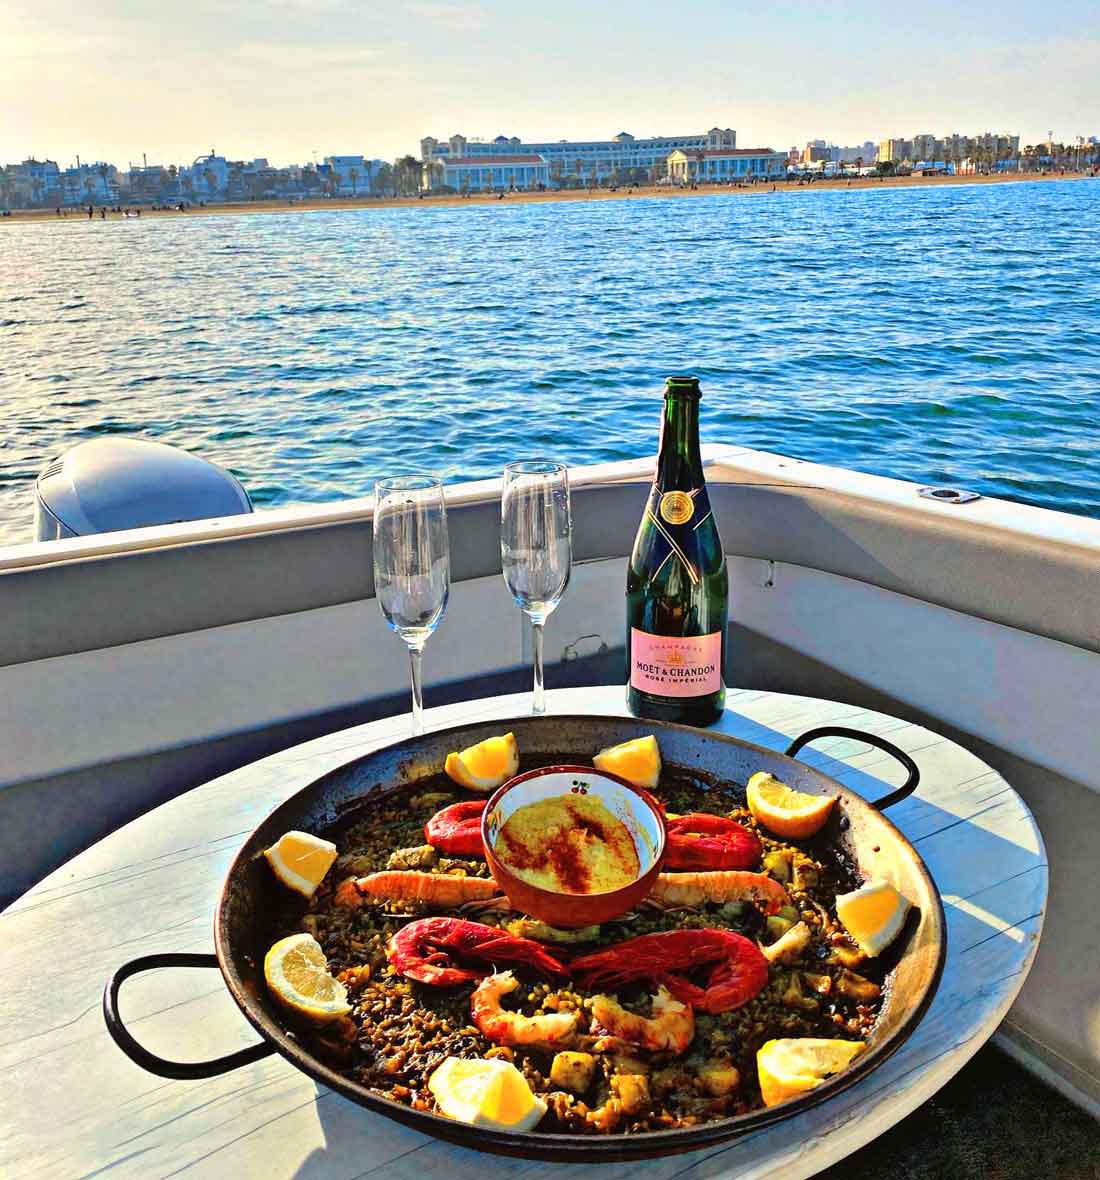 Enjoy a paella on board our boat rental service.